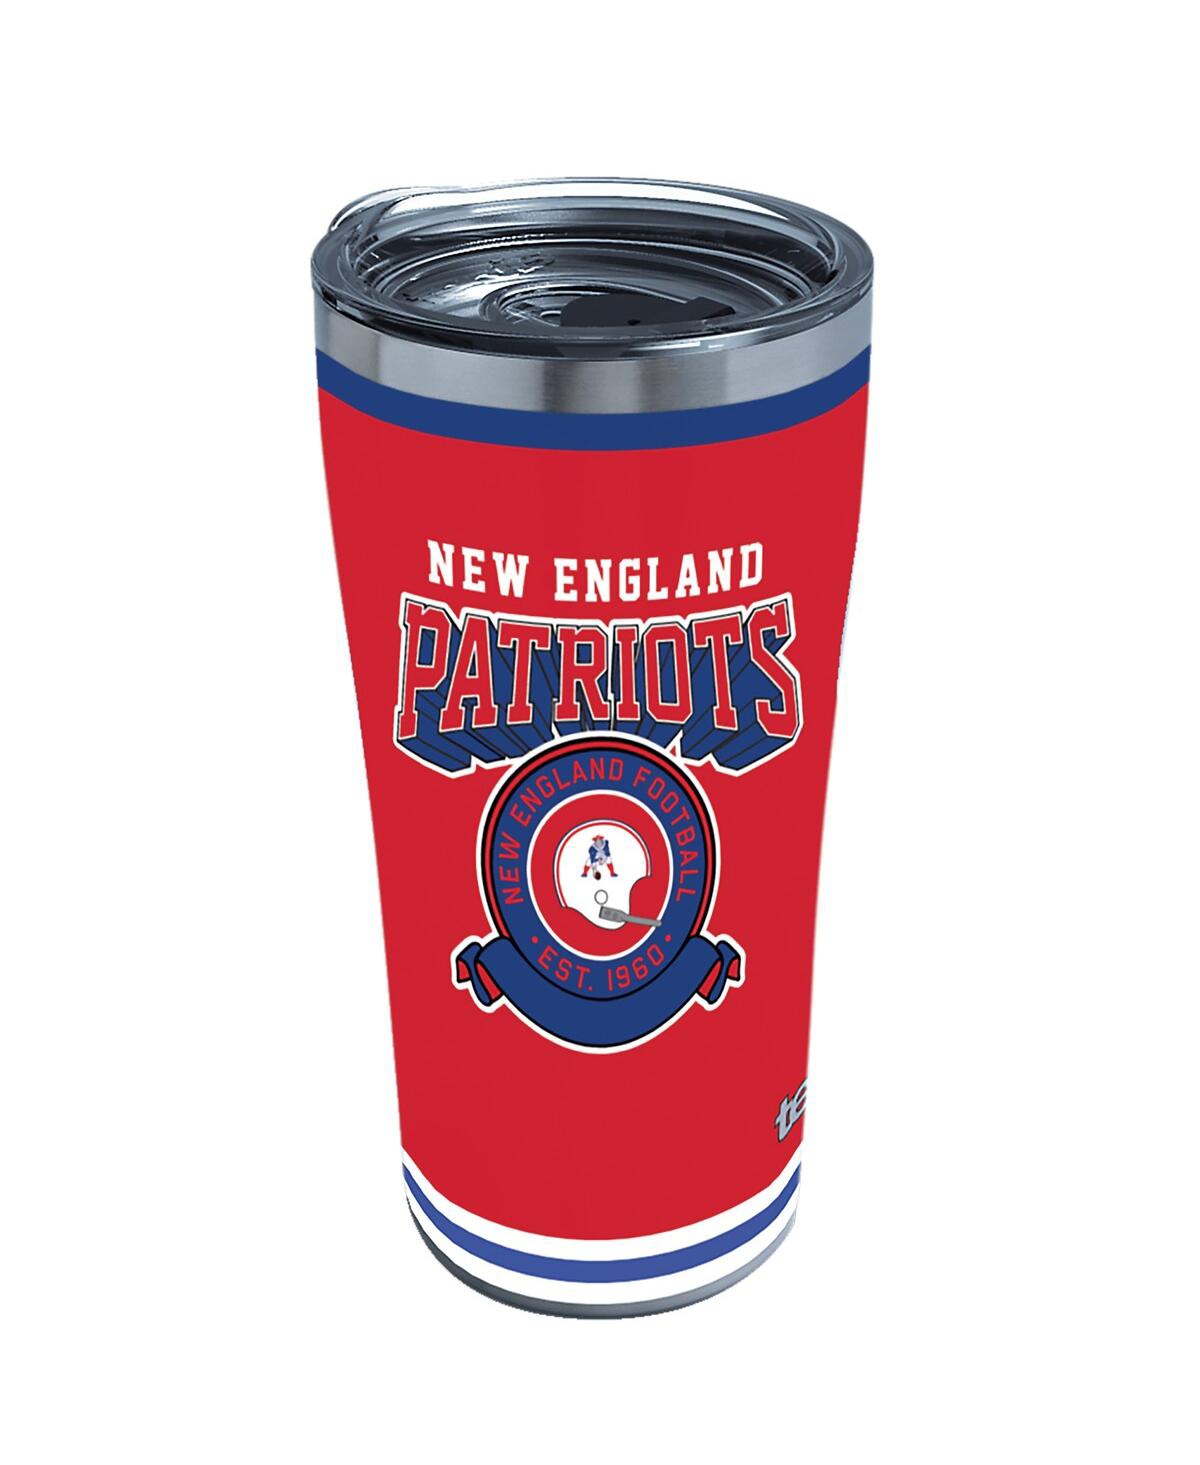 Tervis Tumbler New England Patriots 20 oz Vintage-inspired Stainless Steel Tumbler In Red